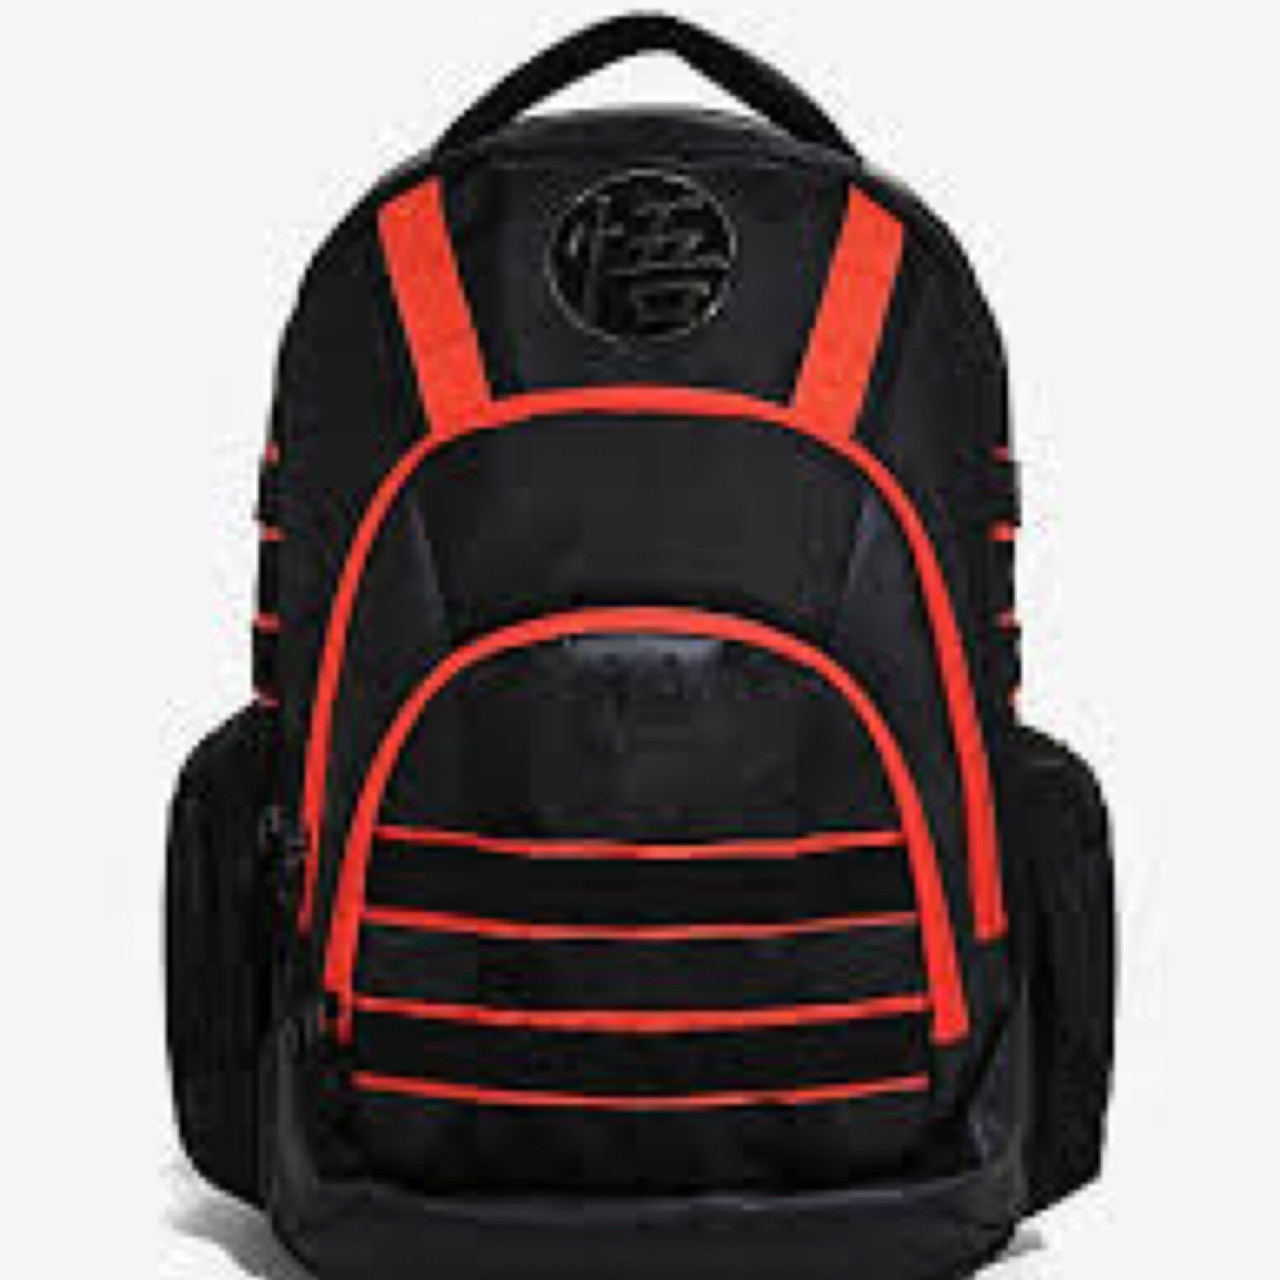 Small Size Backpack — DBZ Store